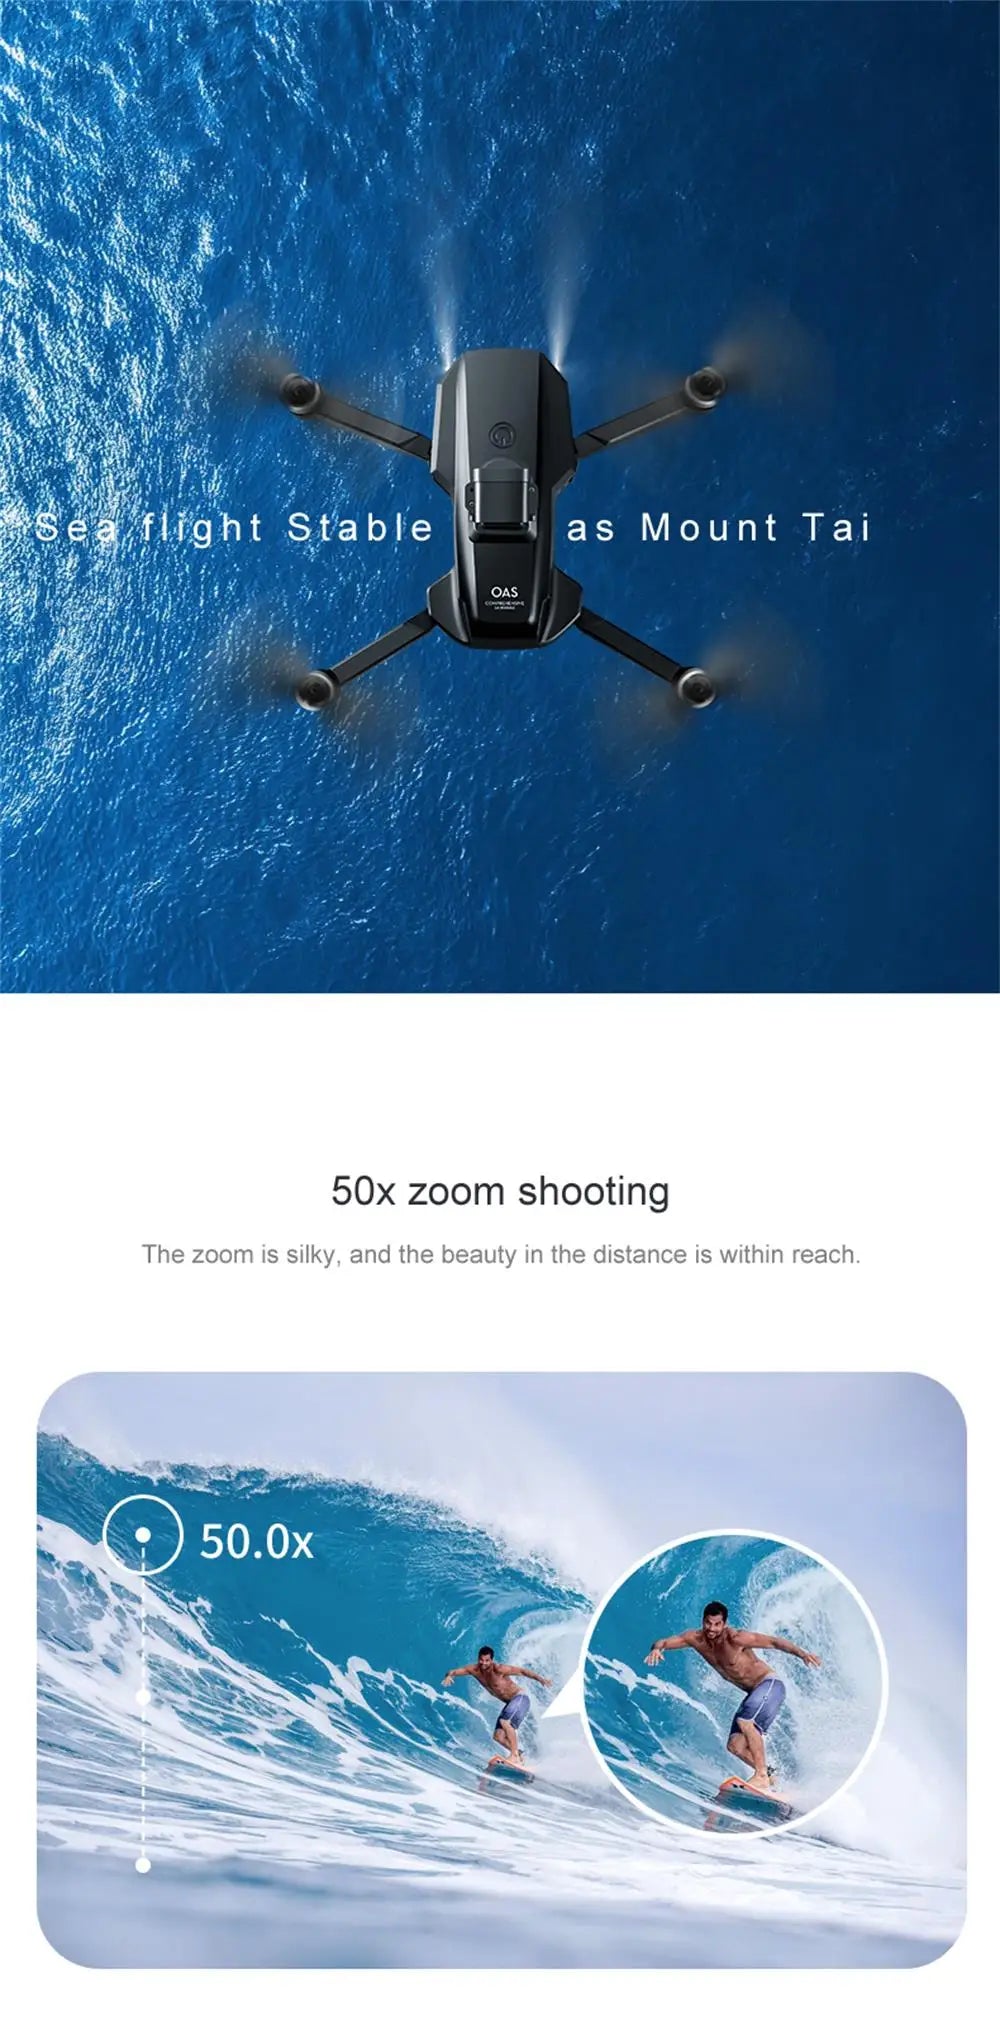 RG101 MAX Drone, sea flight Stable as Mount Tai OAs 50x zoom shooting The zoom is silky